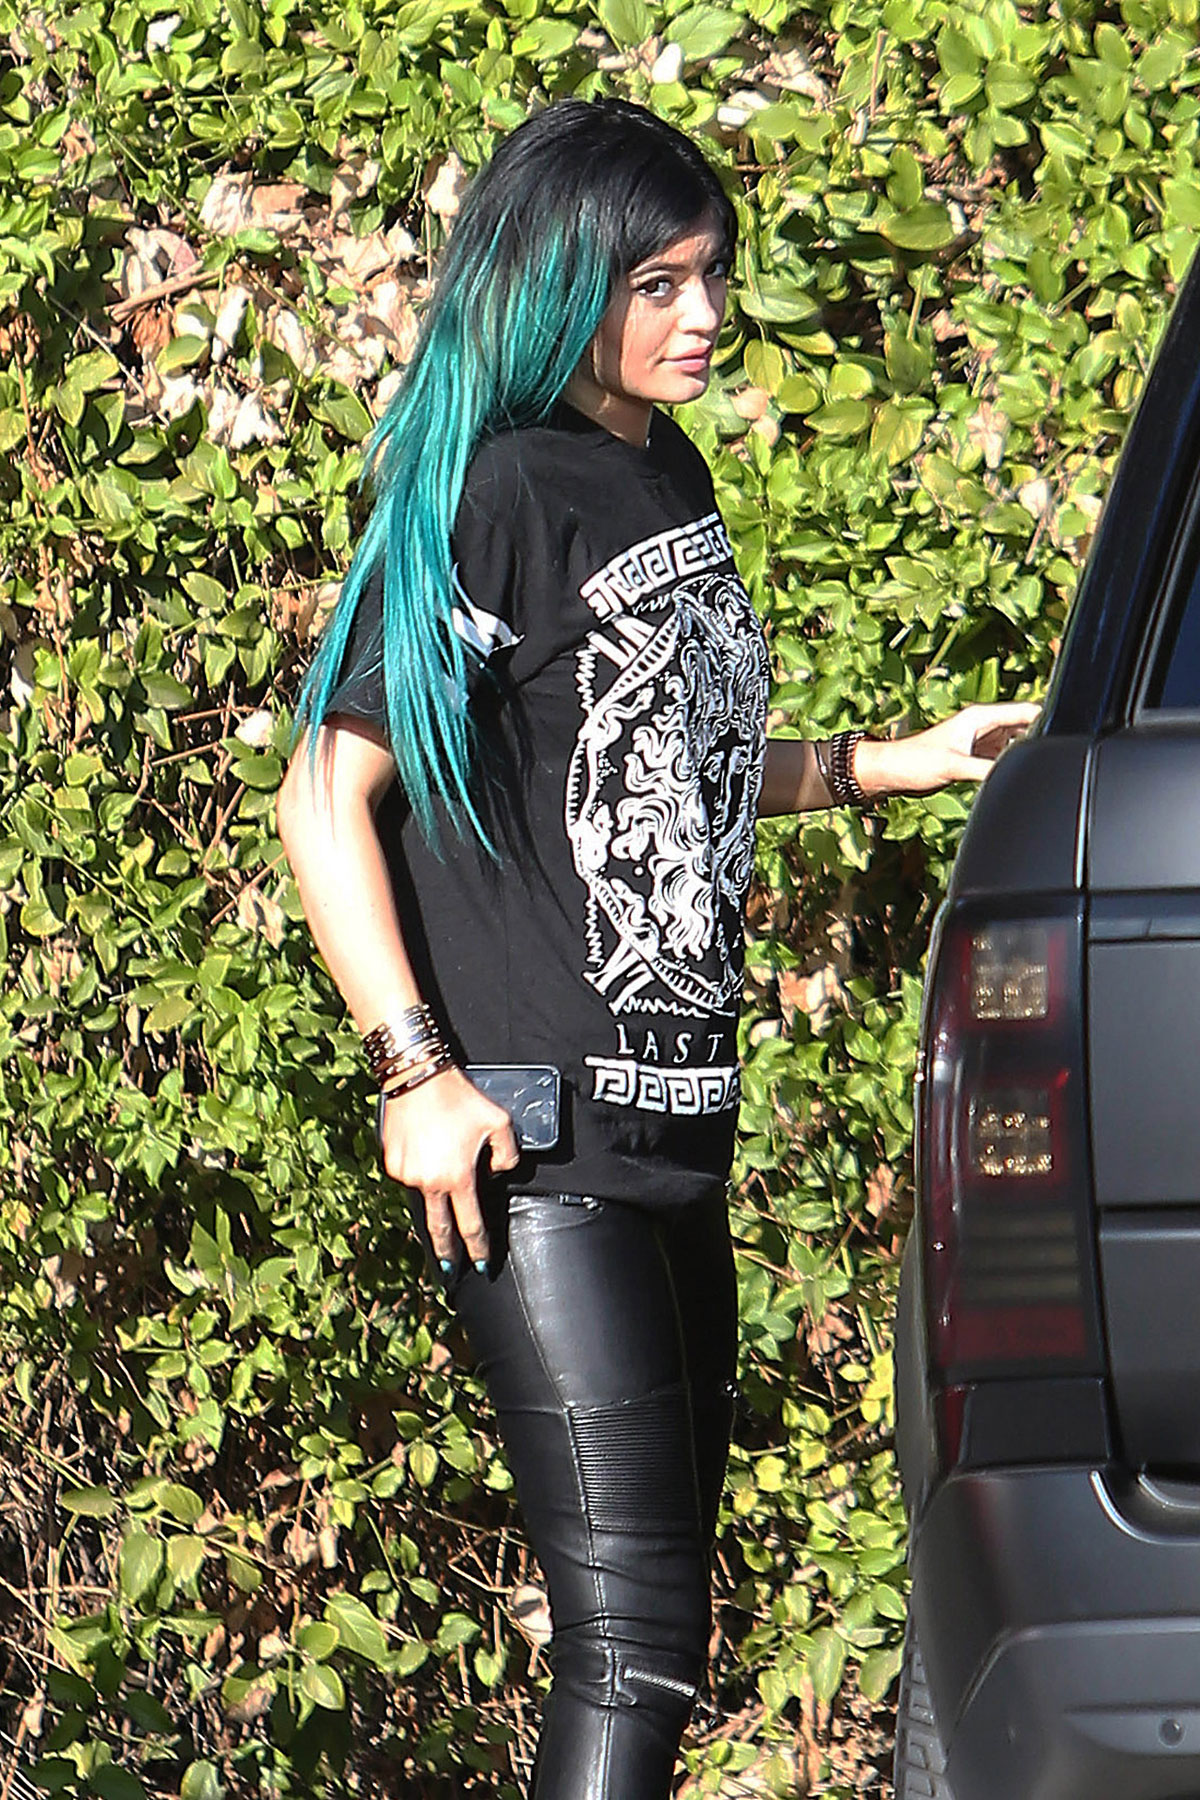 Kylie Jenner out & about in LA